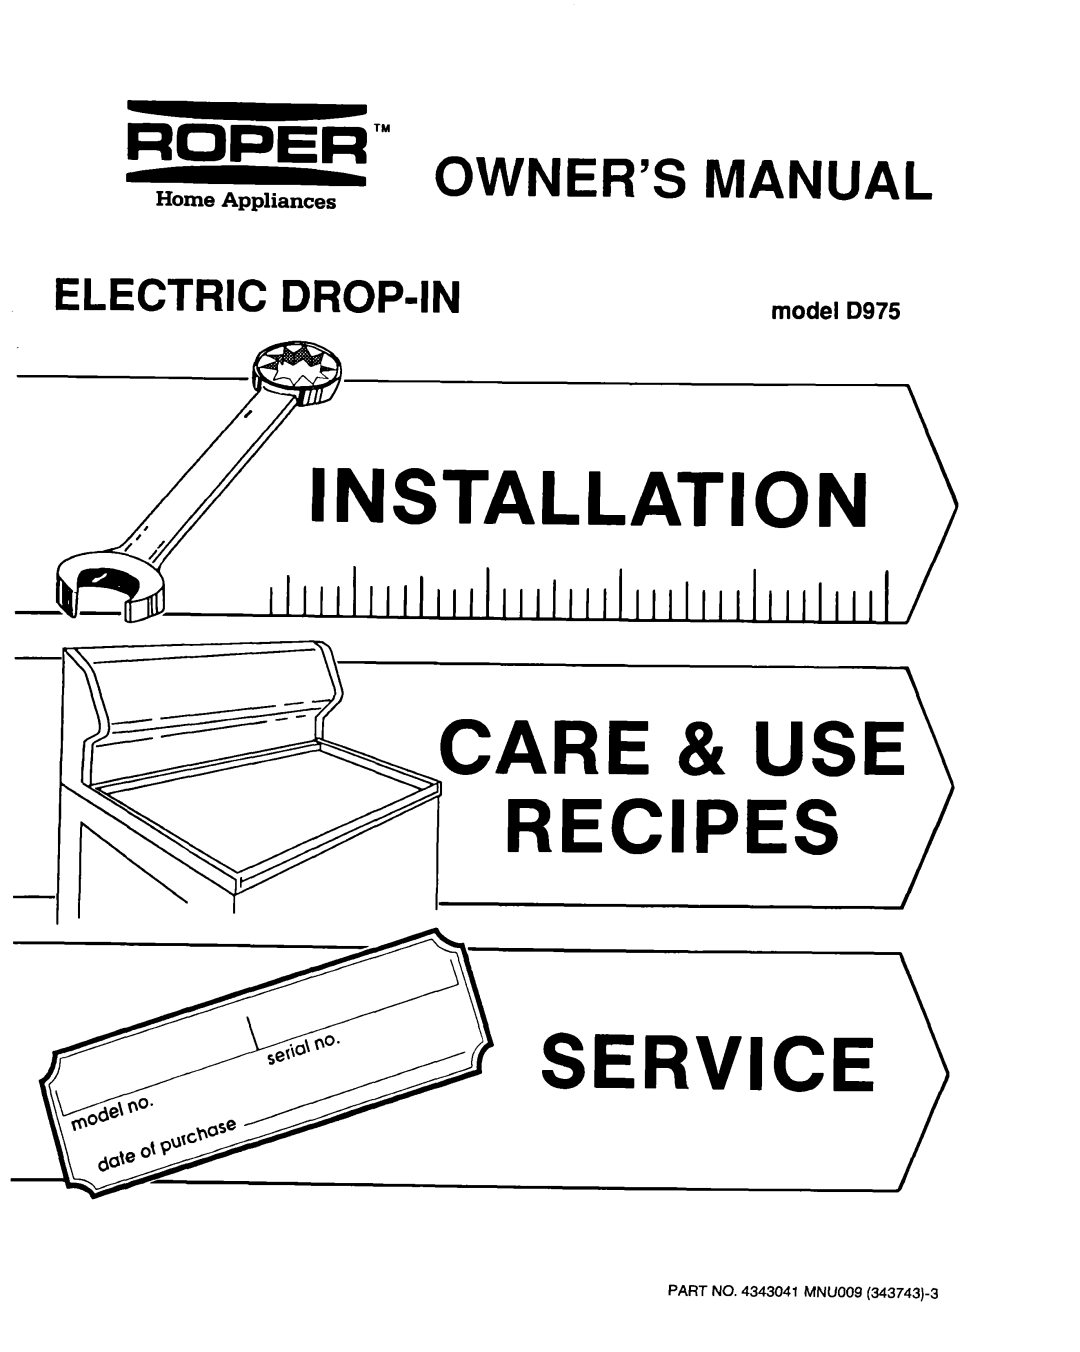 Roper owner manual model D975, Roper”, Installation Care & Use Recipes, Electric Drop-In 